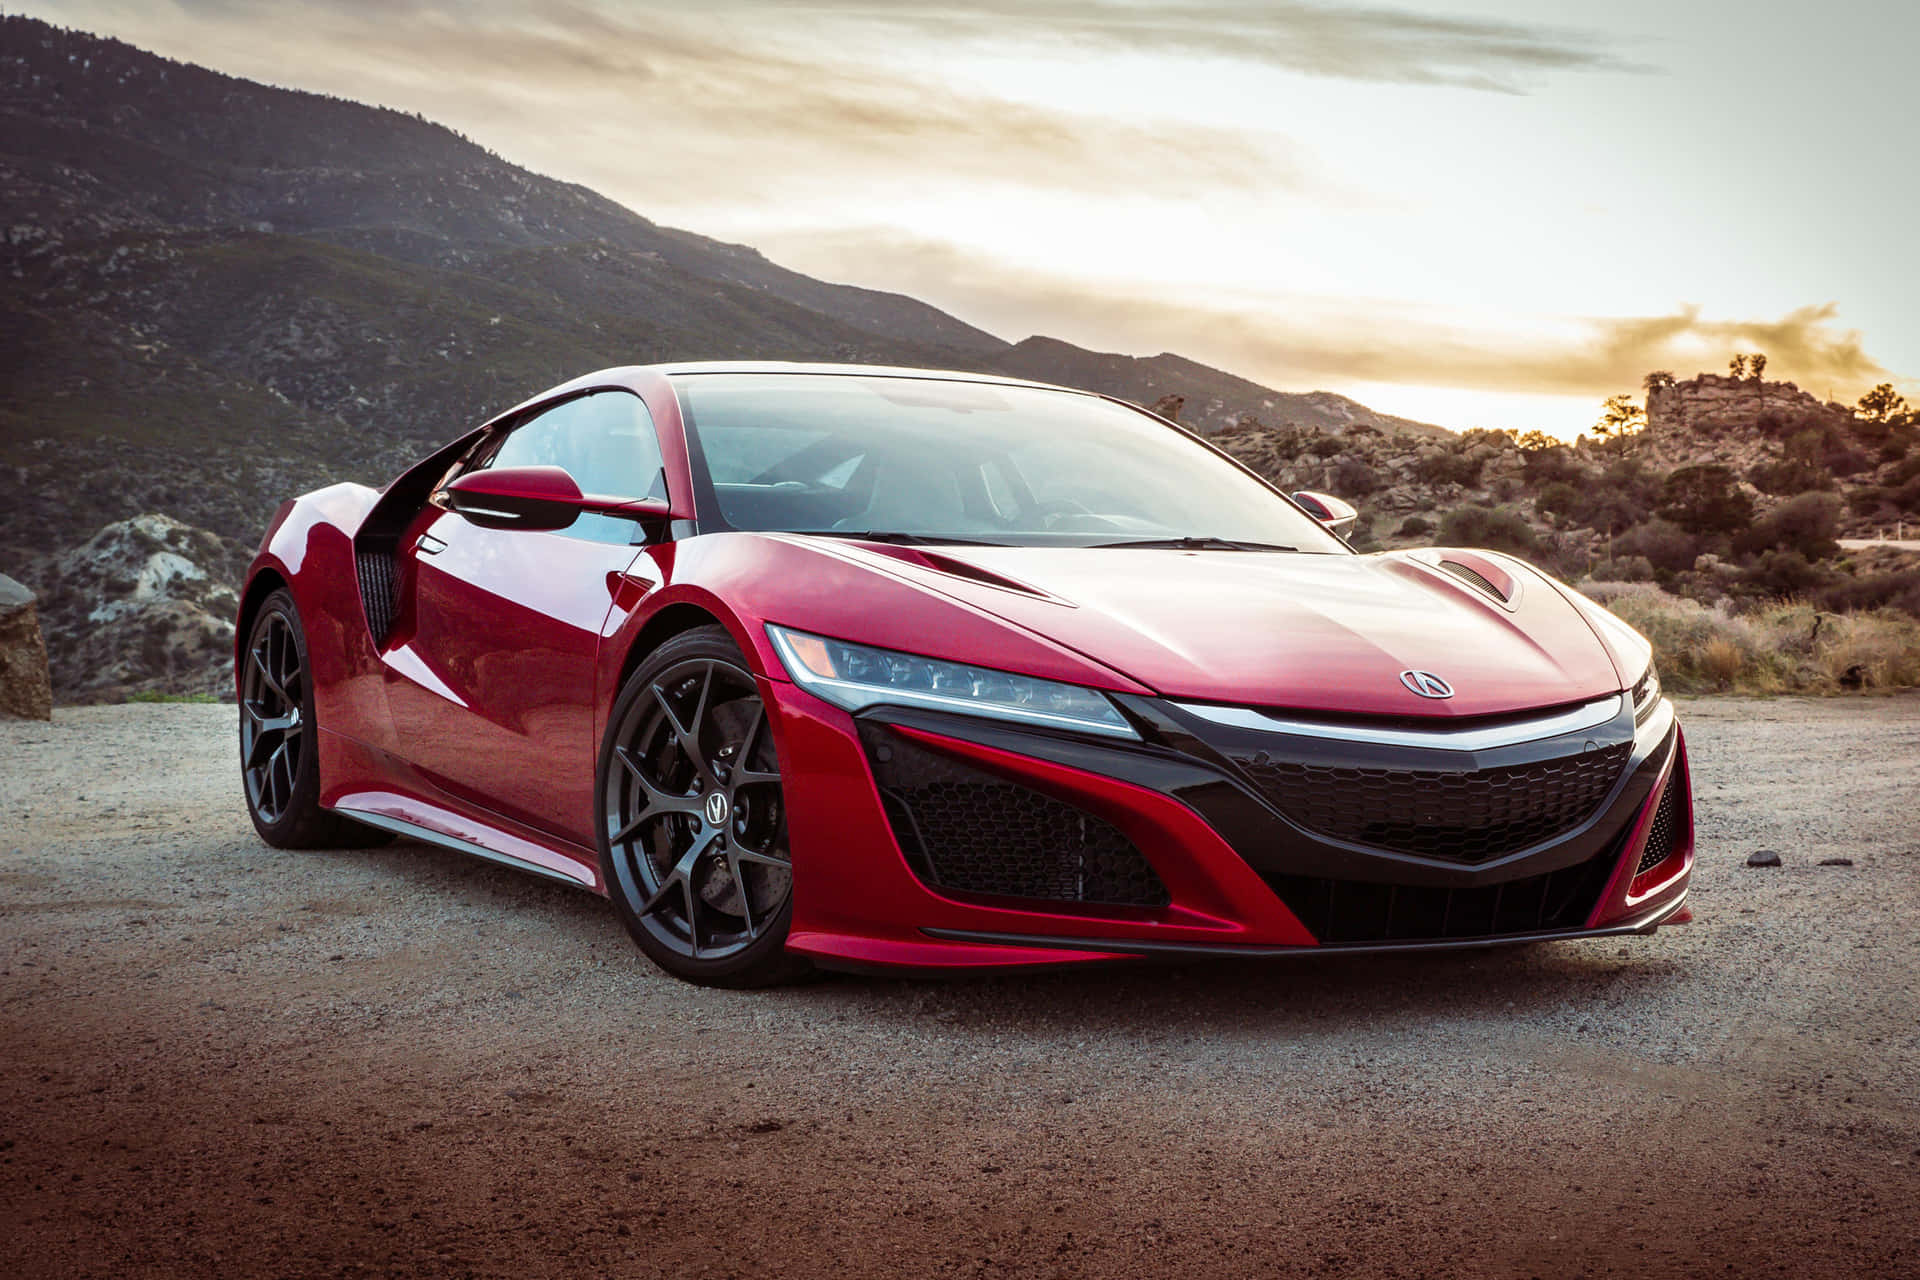 Style and Luxury at its Finest - Acura